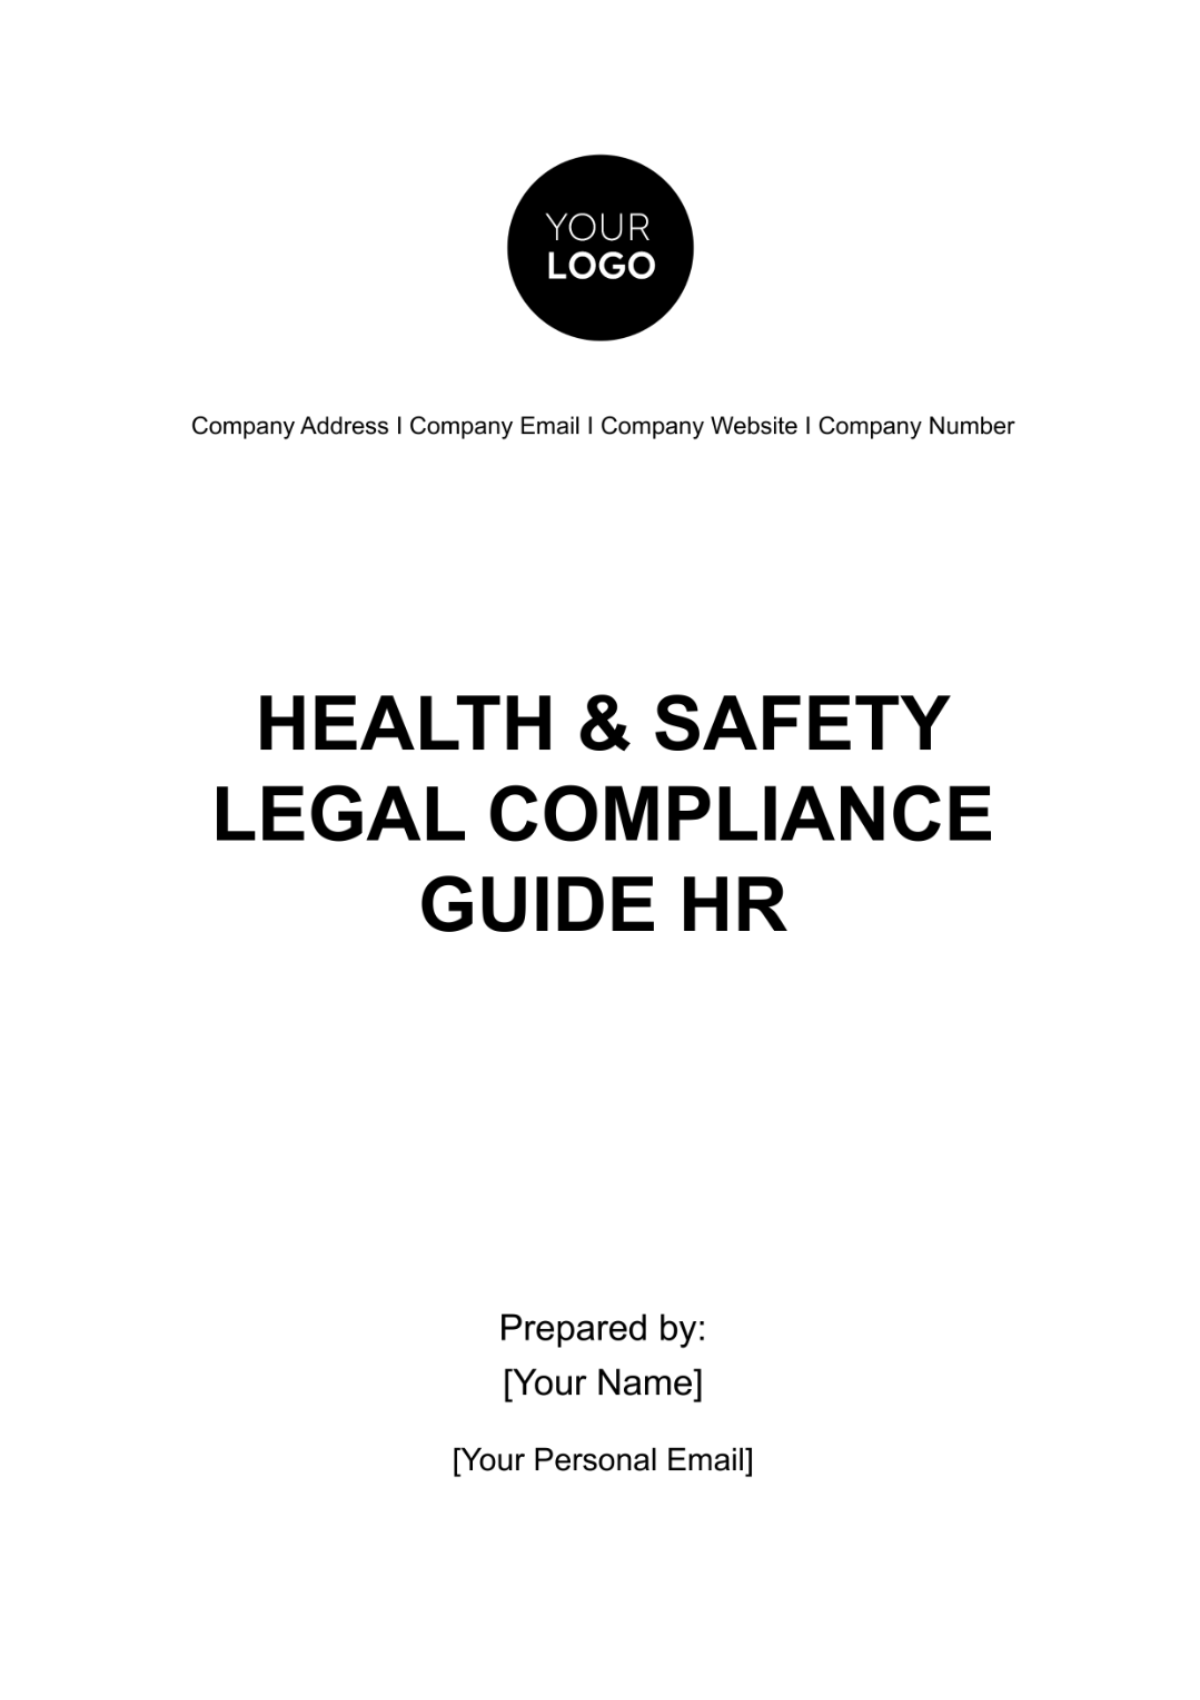 Free Health & Safety Legal Compliance Guide HR Template